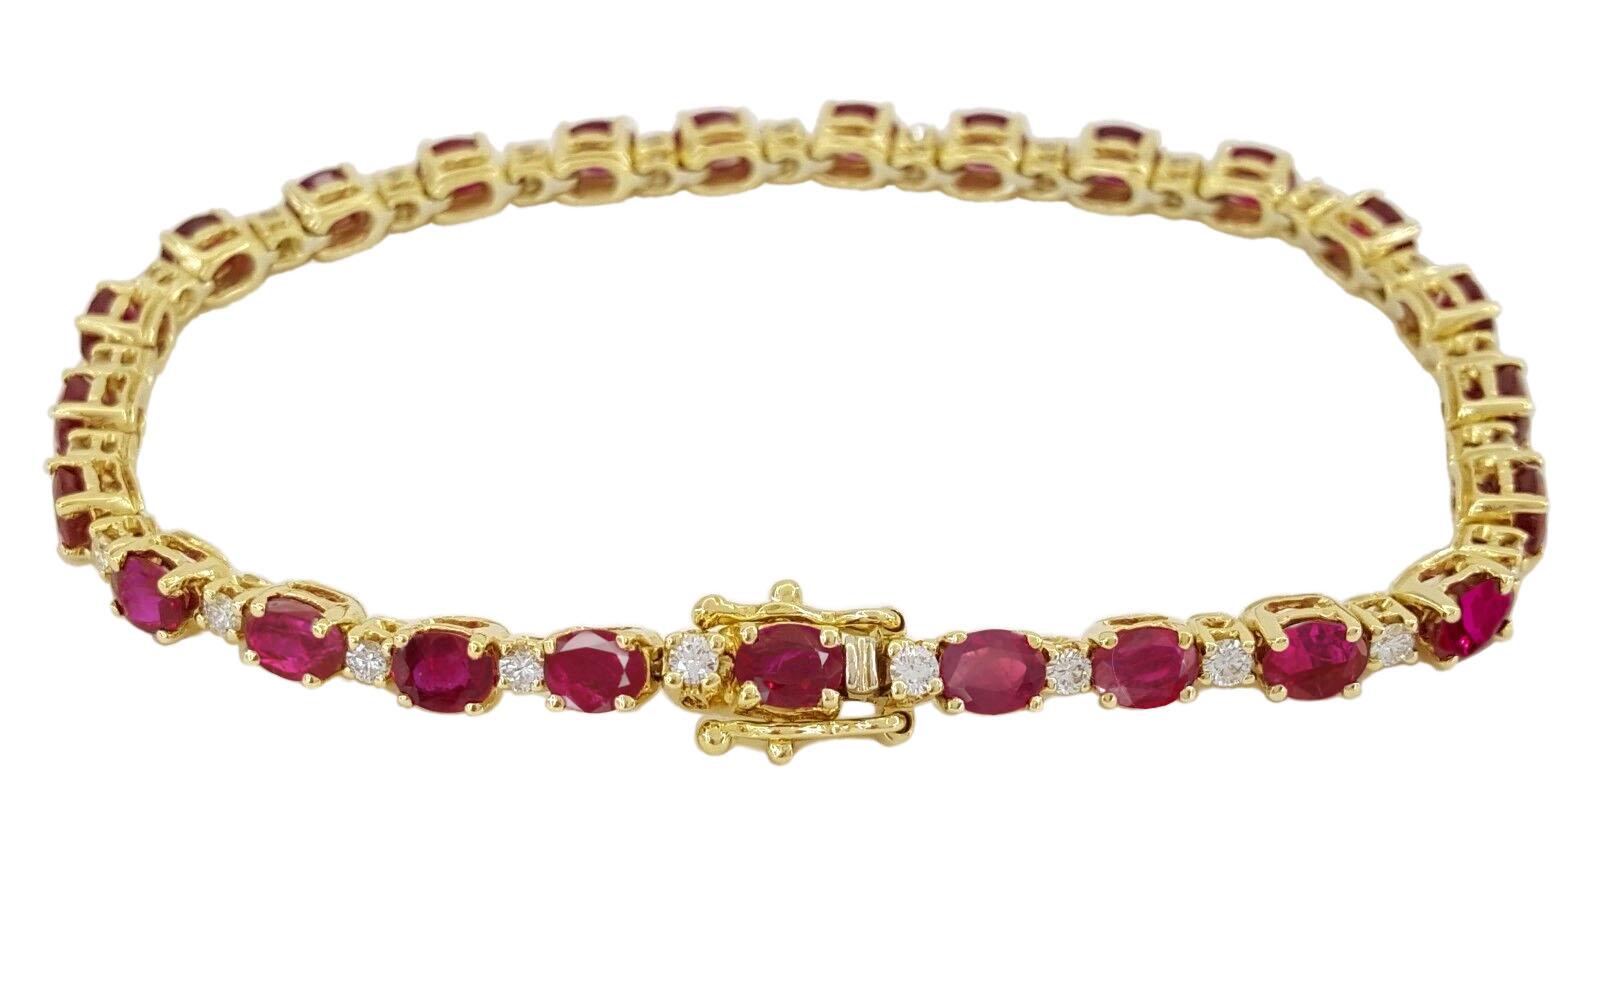 Round Brilliant Cut Diamond & Oval Cut Red Ruby 18k Yellow Gold Tennis Bracelet.

The bracelet weighs 12.7 grams, 7